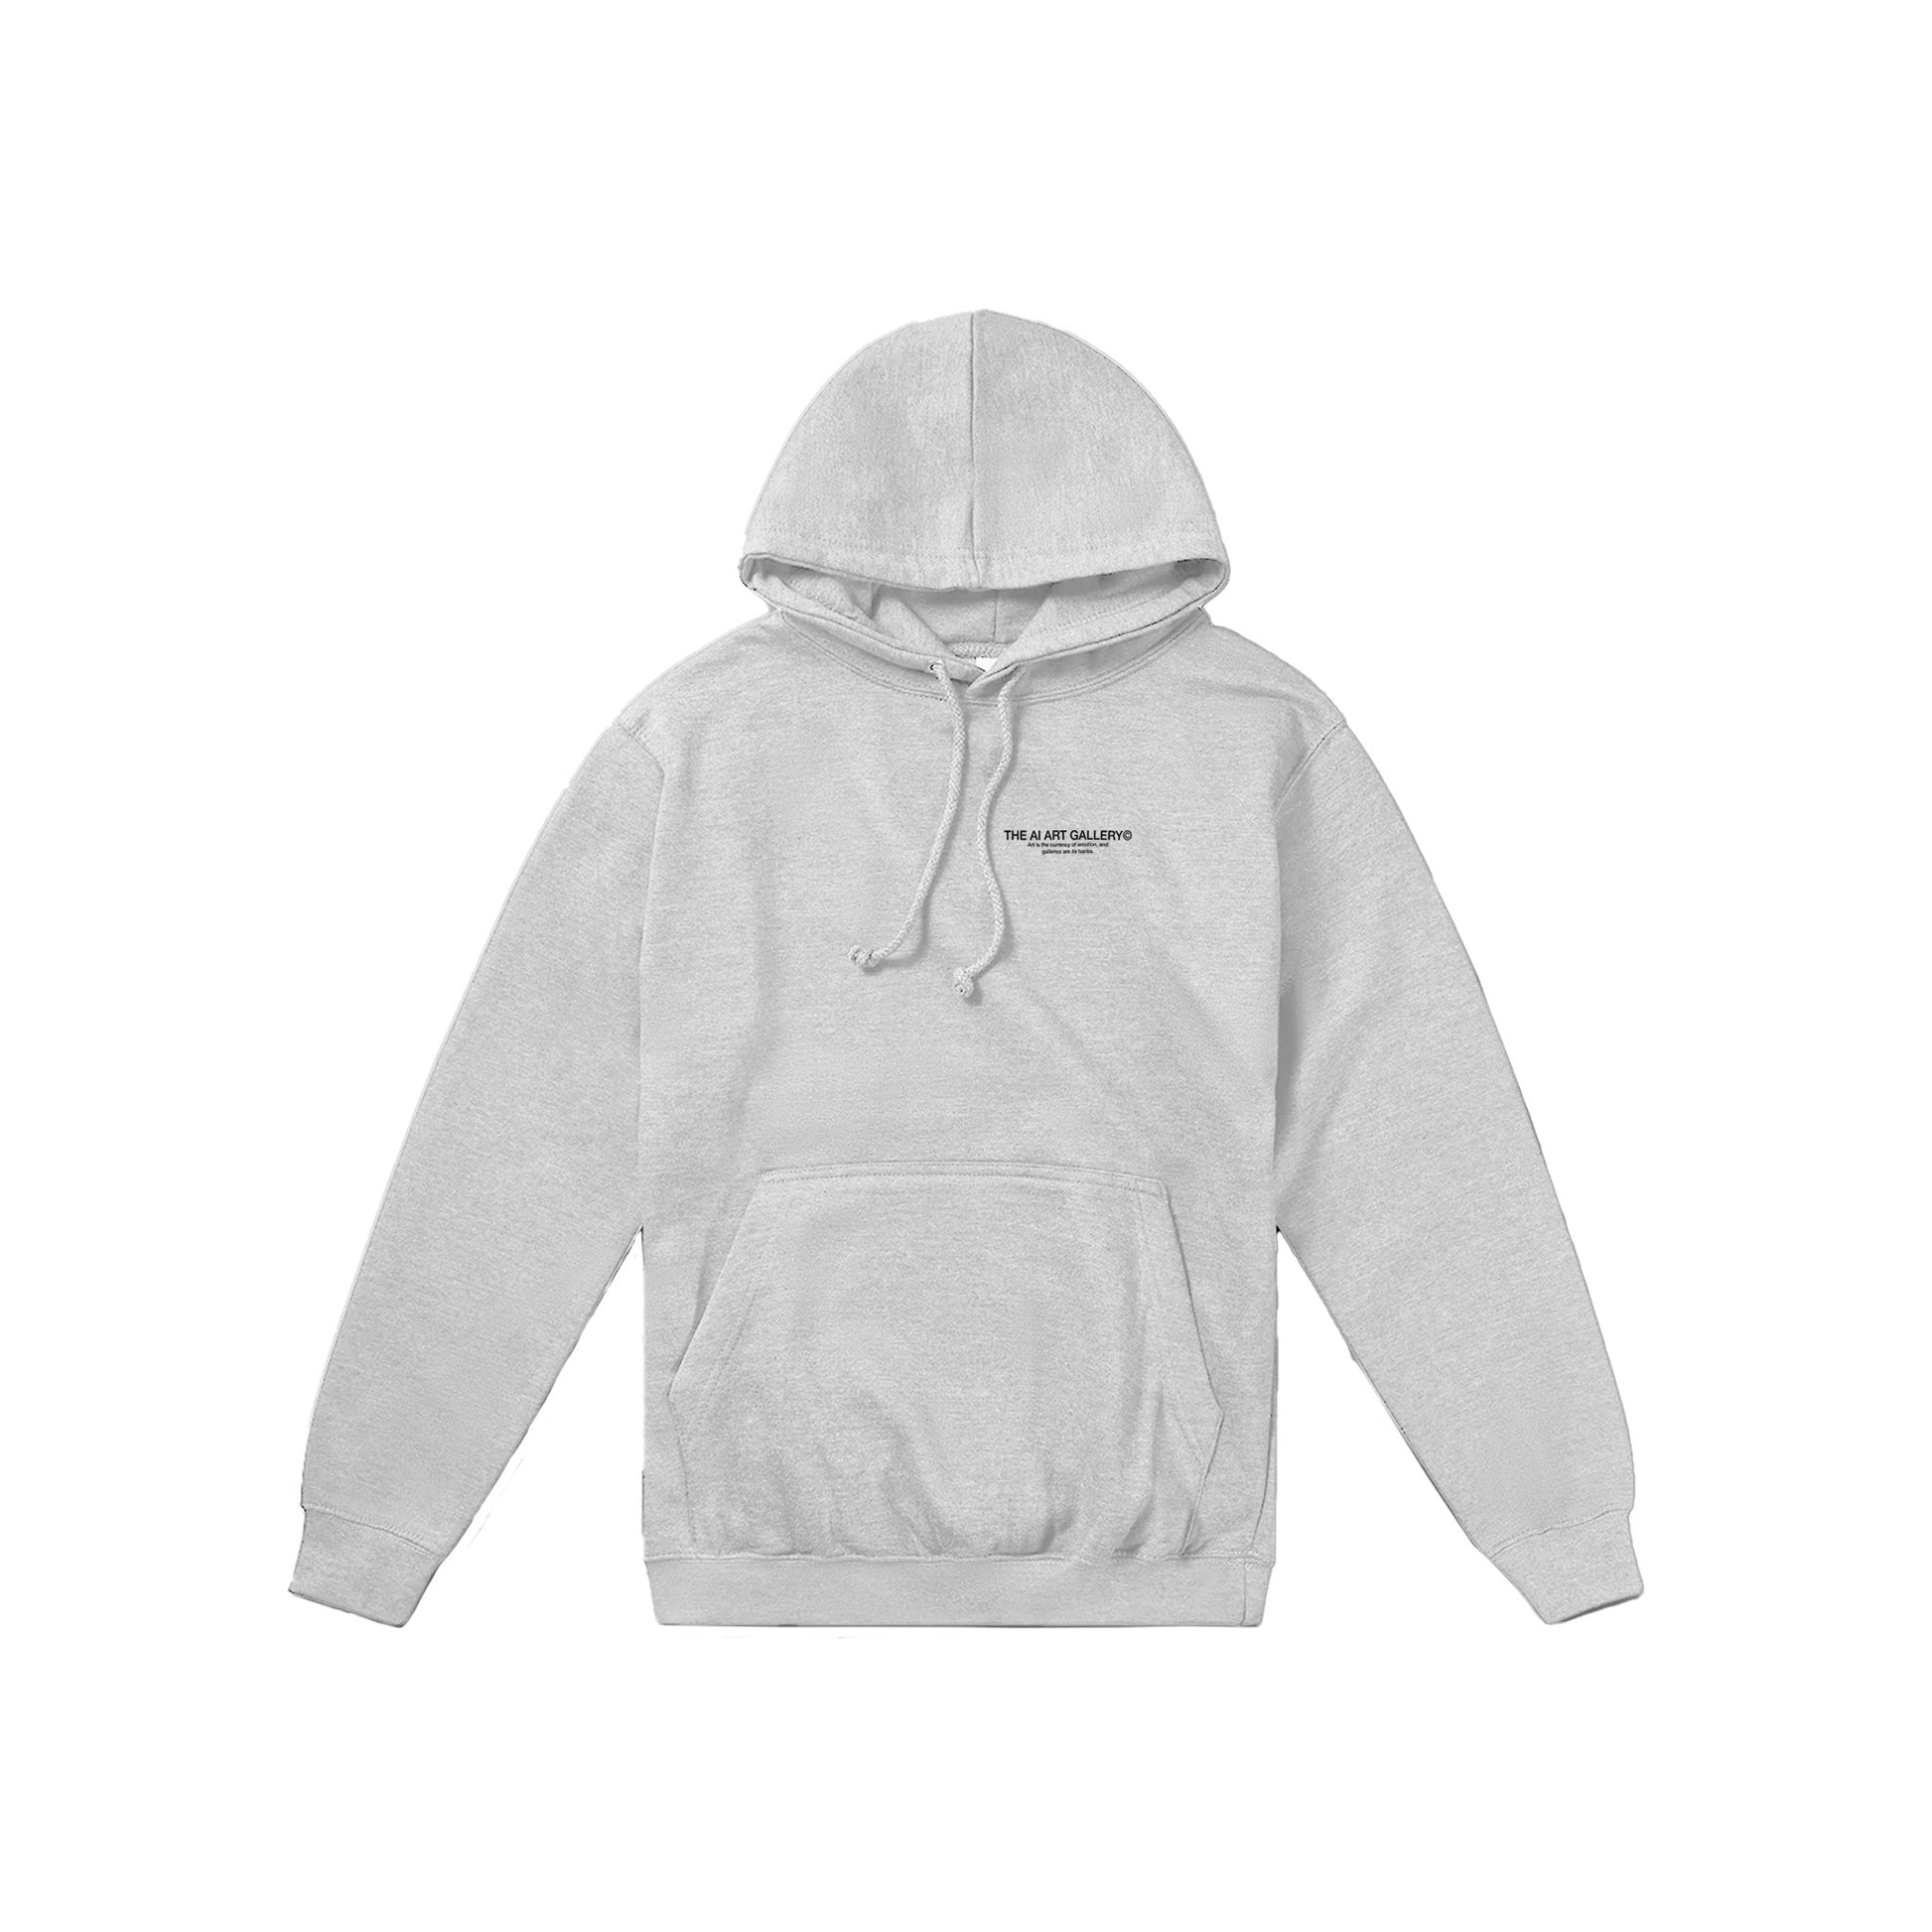 NEED MONEY FOR A PICASSO / Hoodie / White – THE AI ART GALLERY